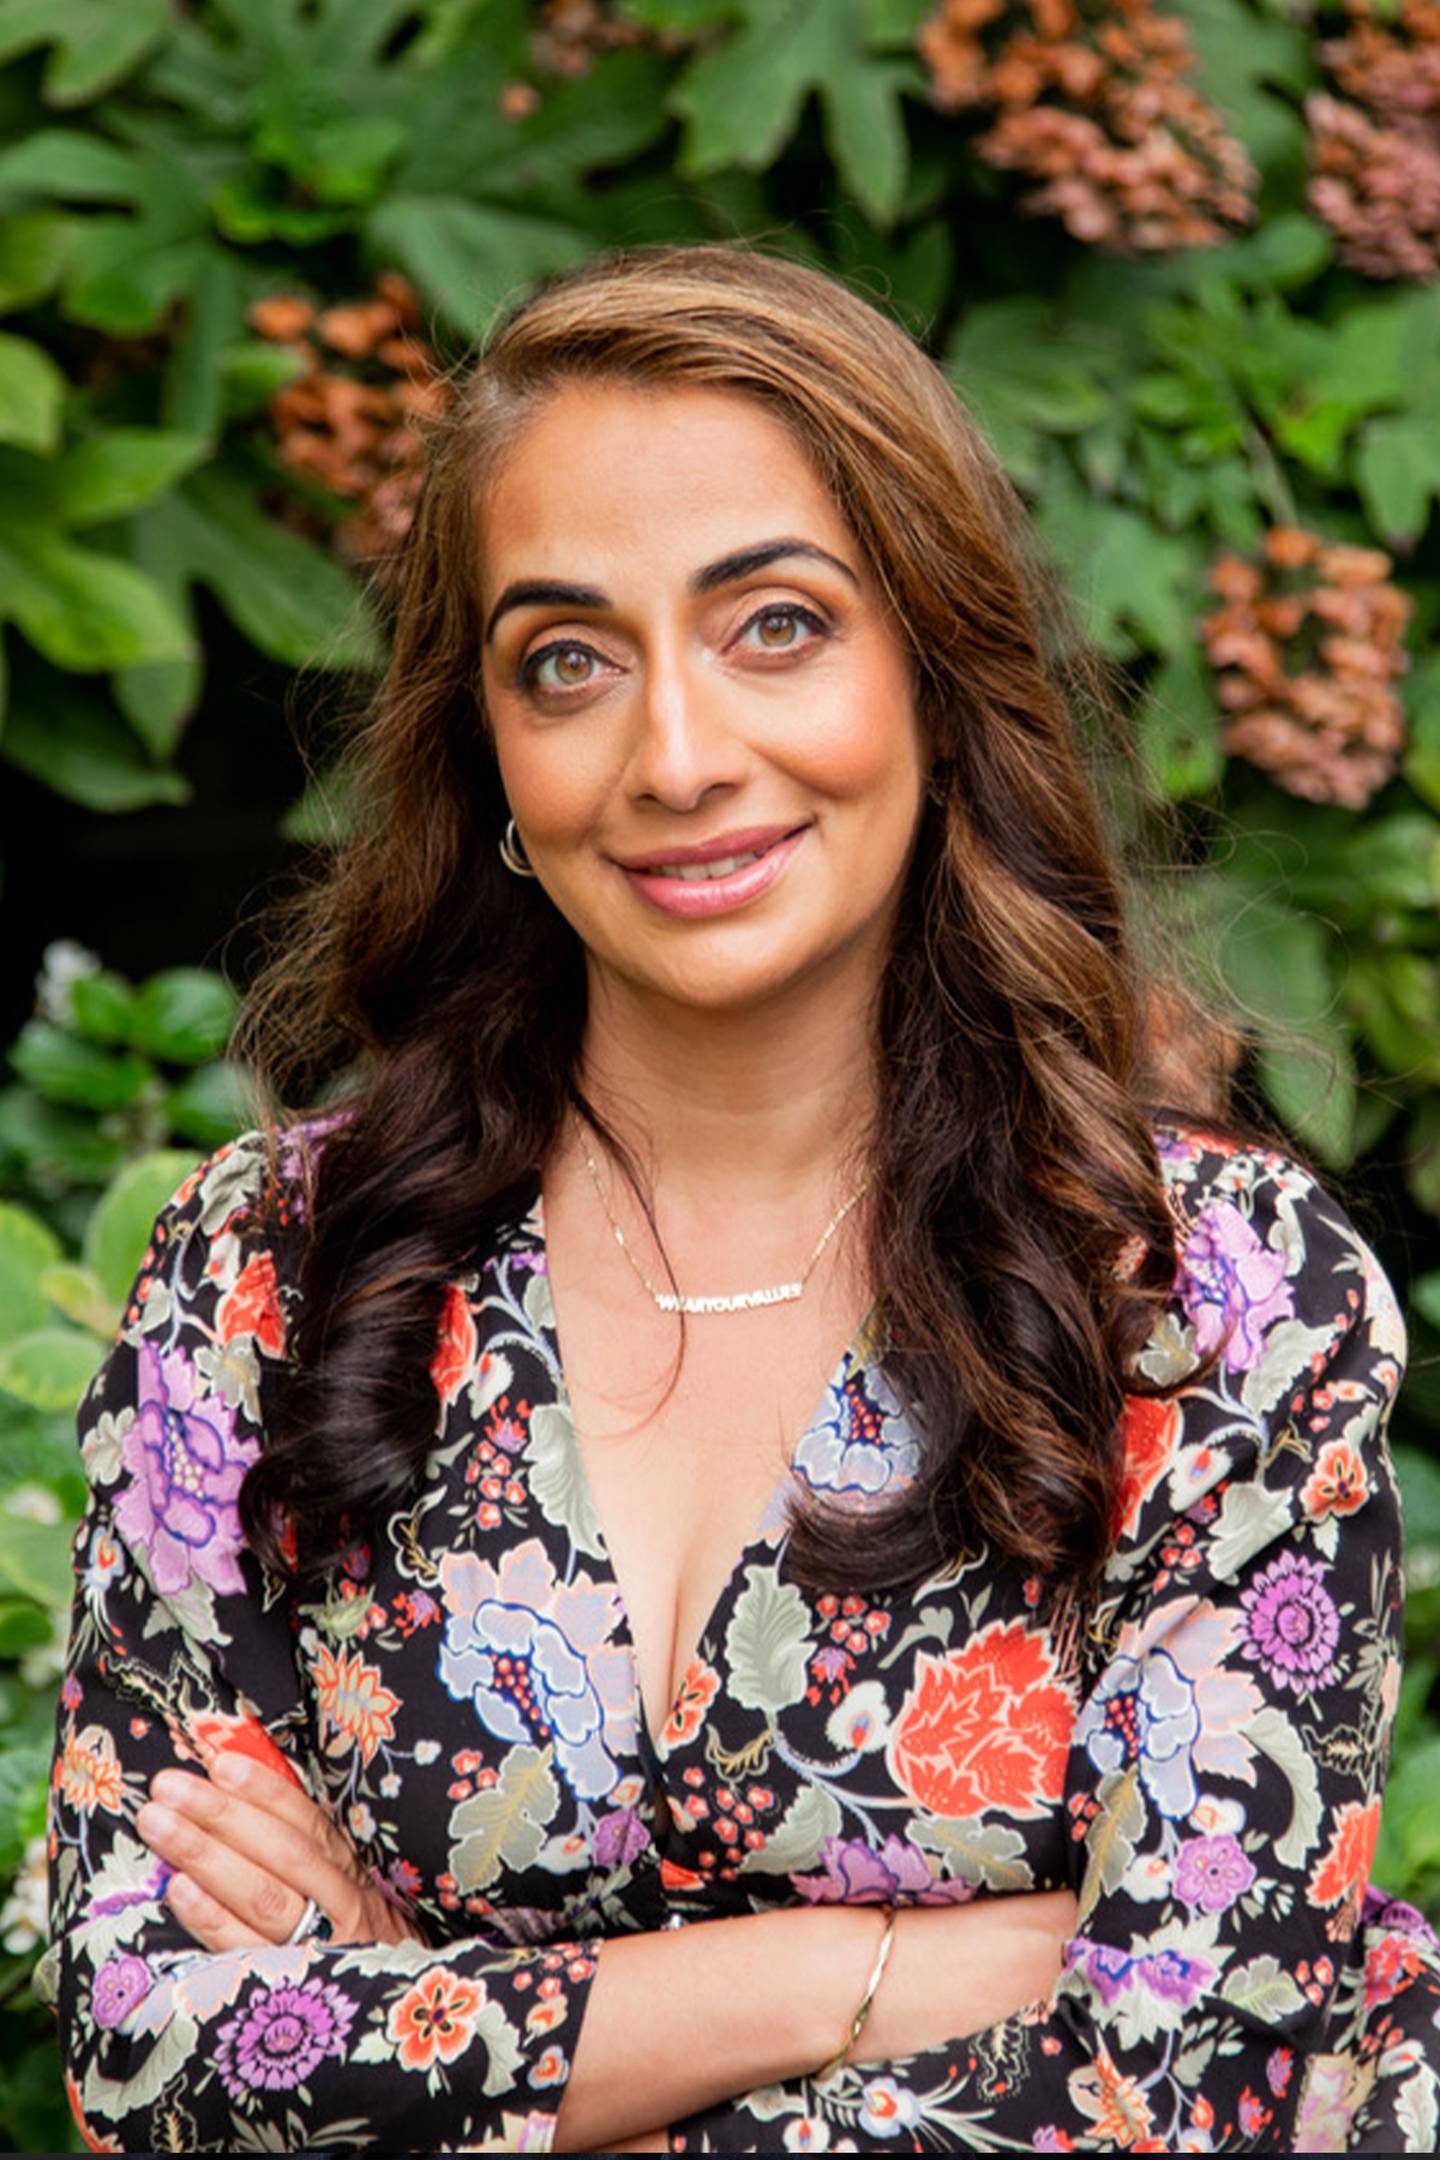 Ayesha Barenblat is a social entrepreneur and founder of Remake.